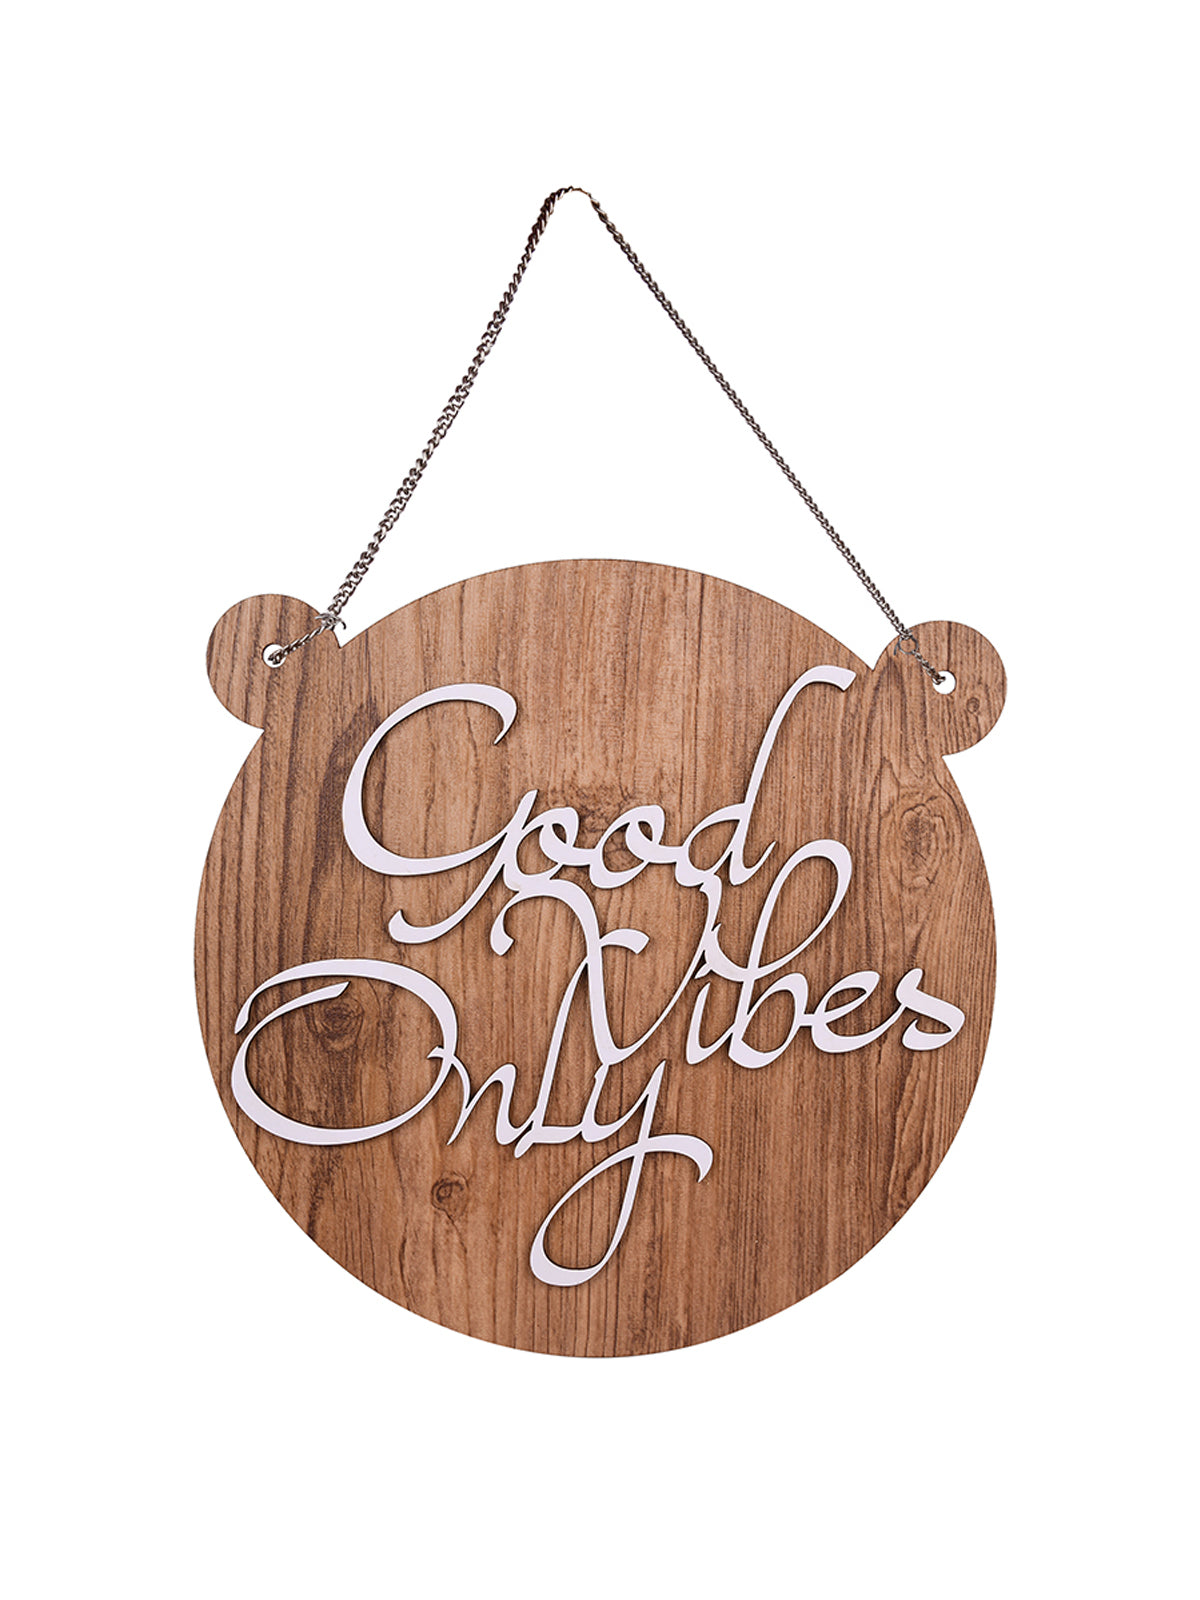 Good Vibes Only Round with Ear Wooden Wall Hanging